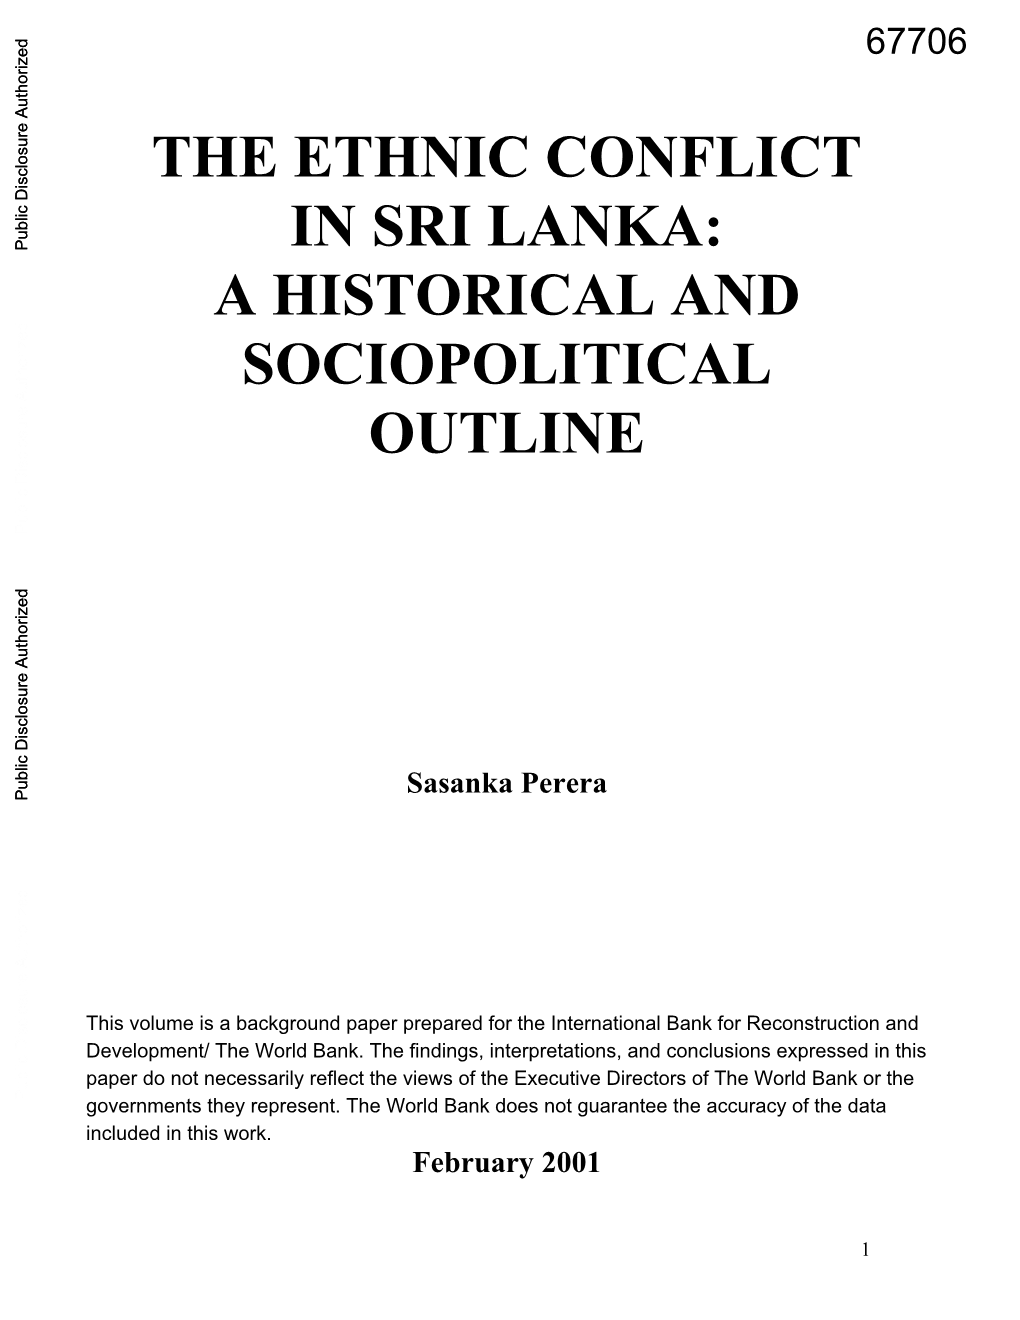 The Ethnic Conflict in Sri Lanka: a Historical and Sociopolitical Outline1